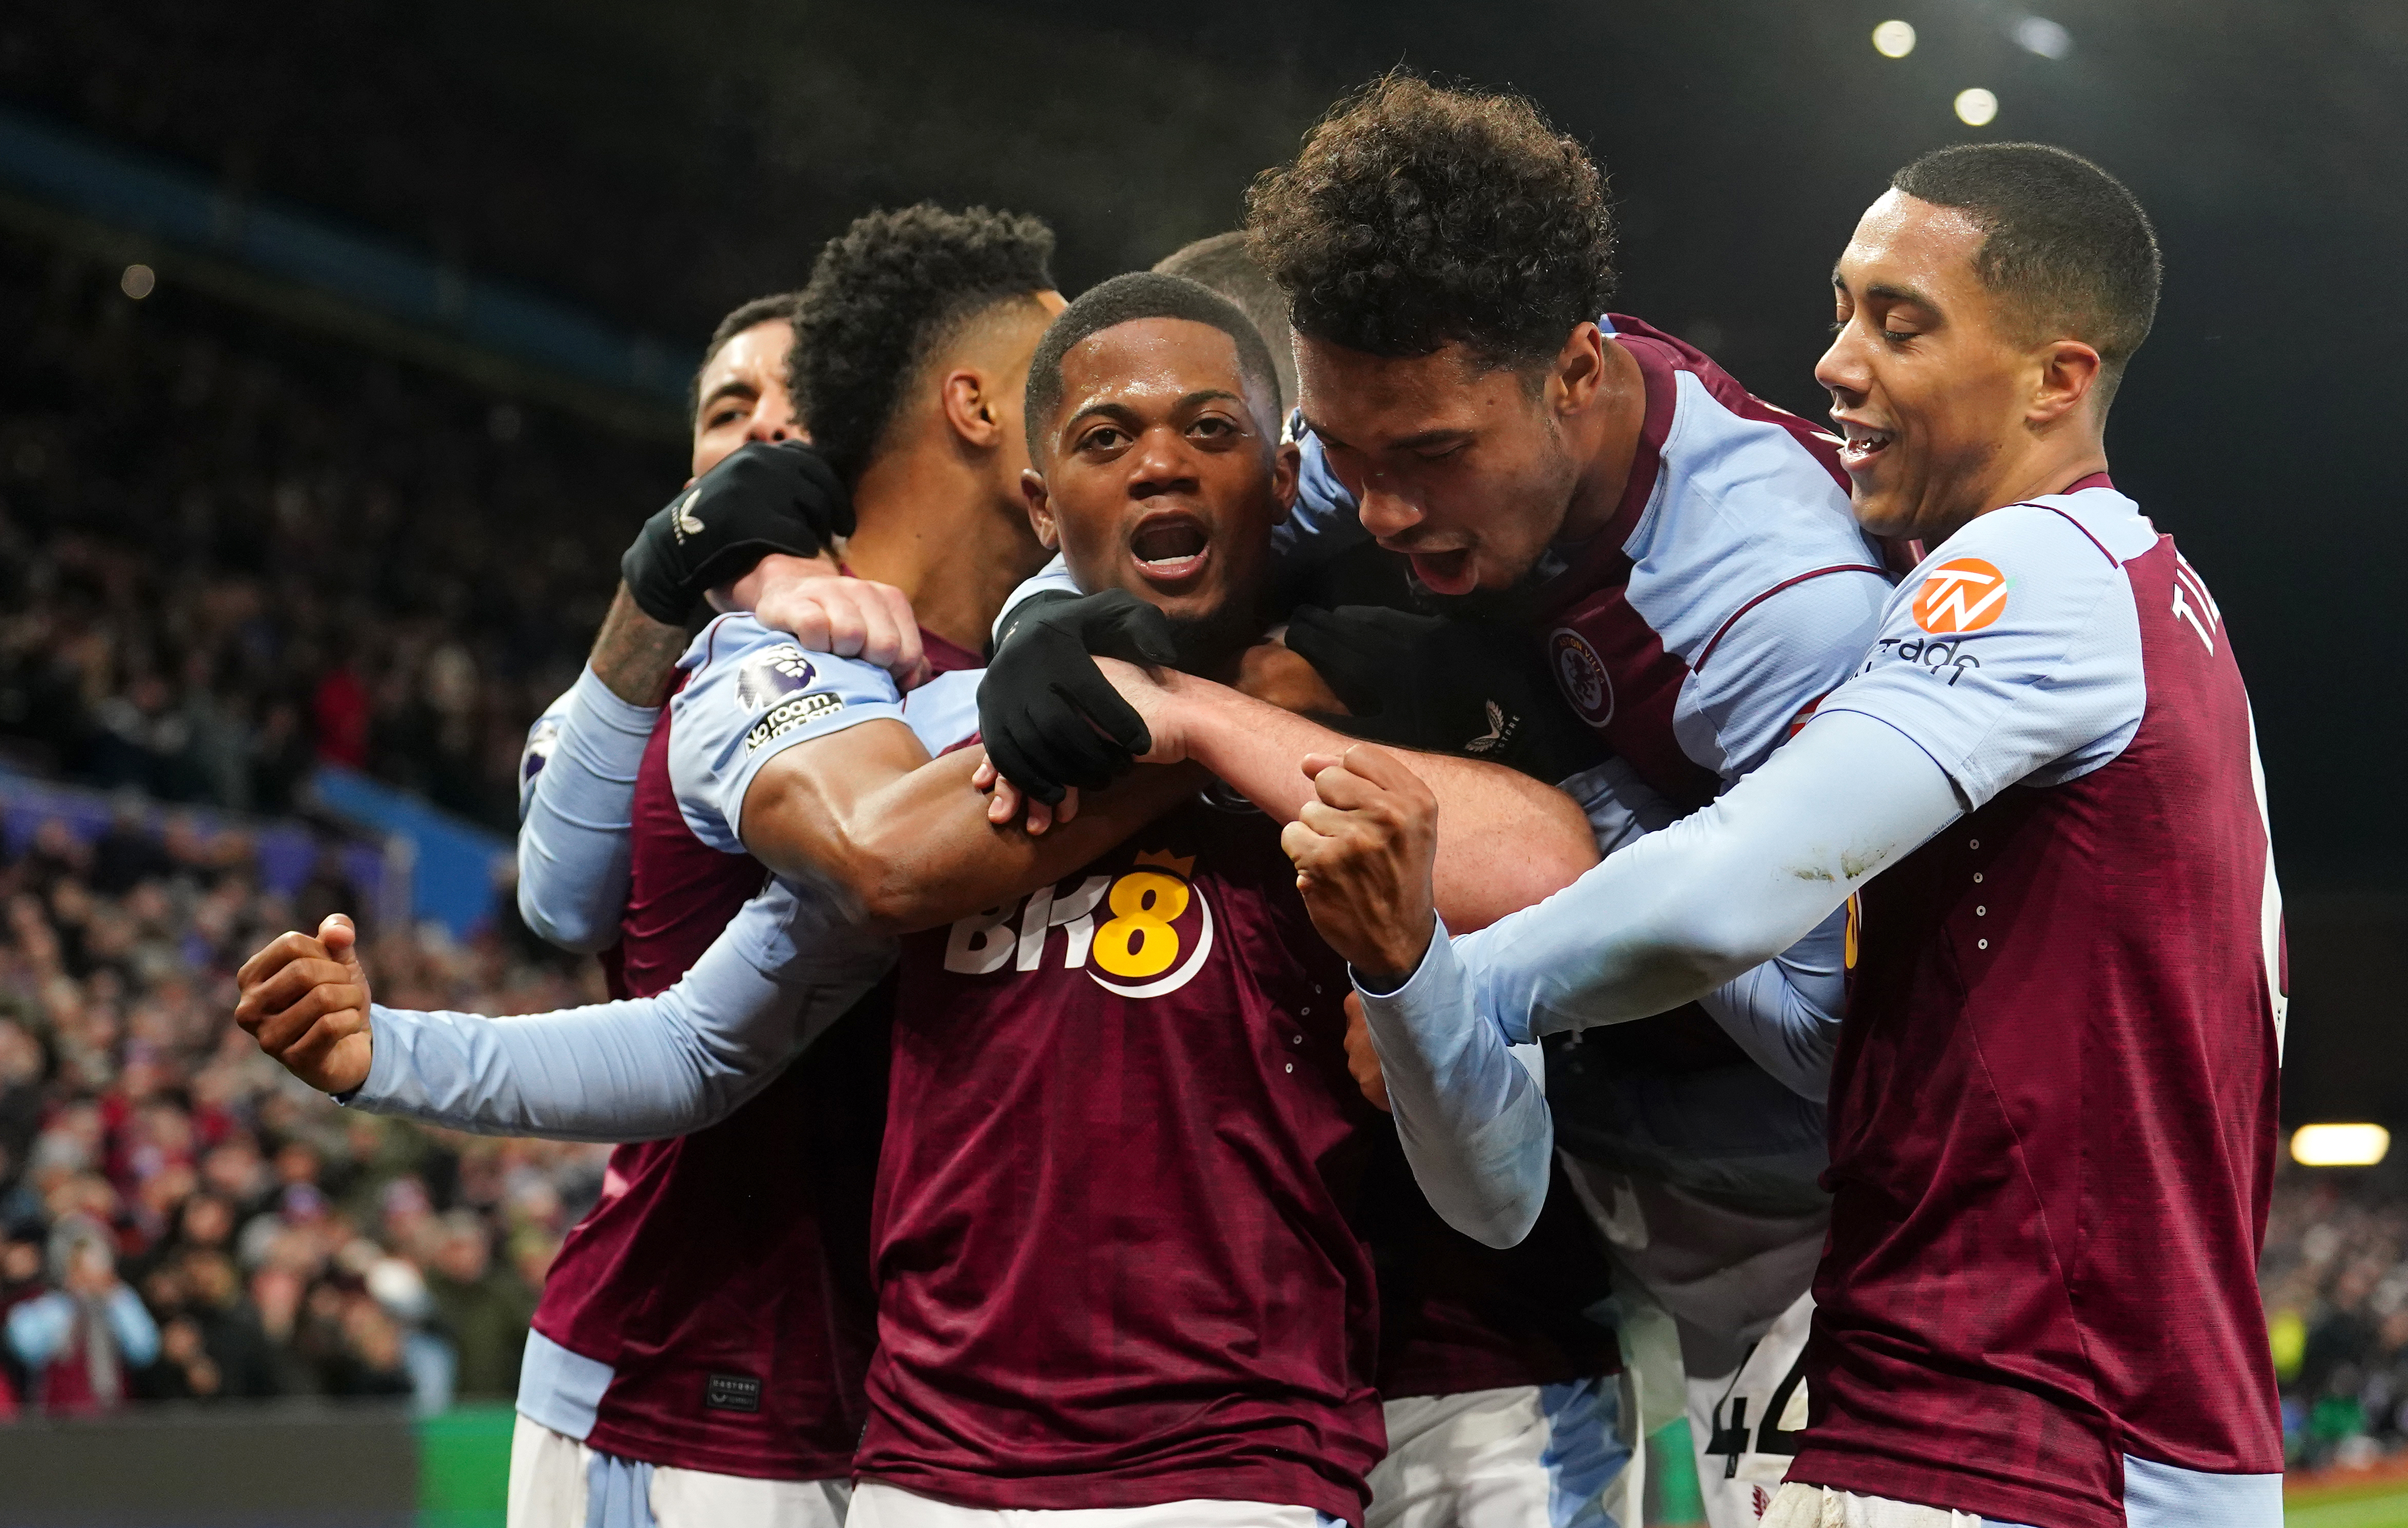 Aston Villa moved up to third with their victory